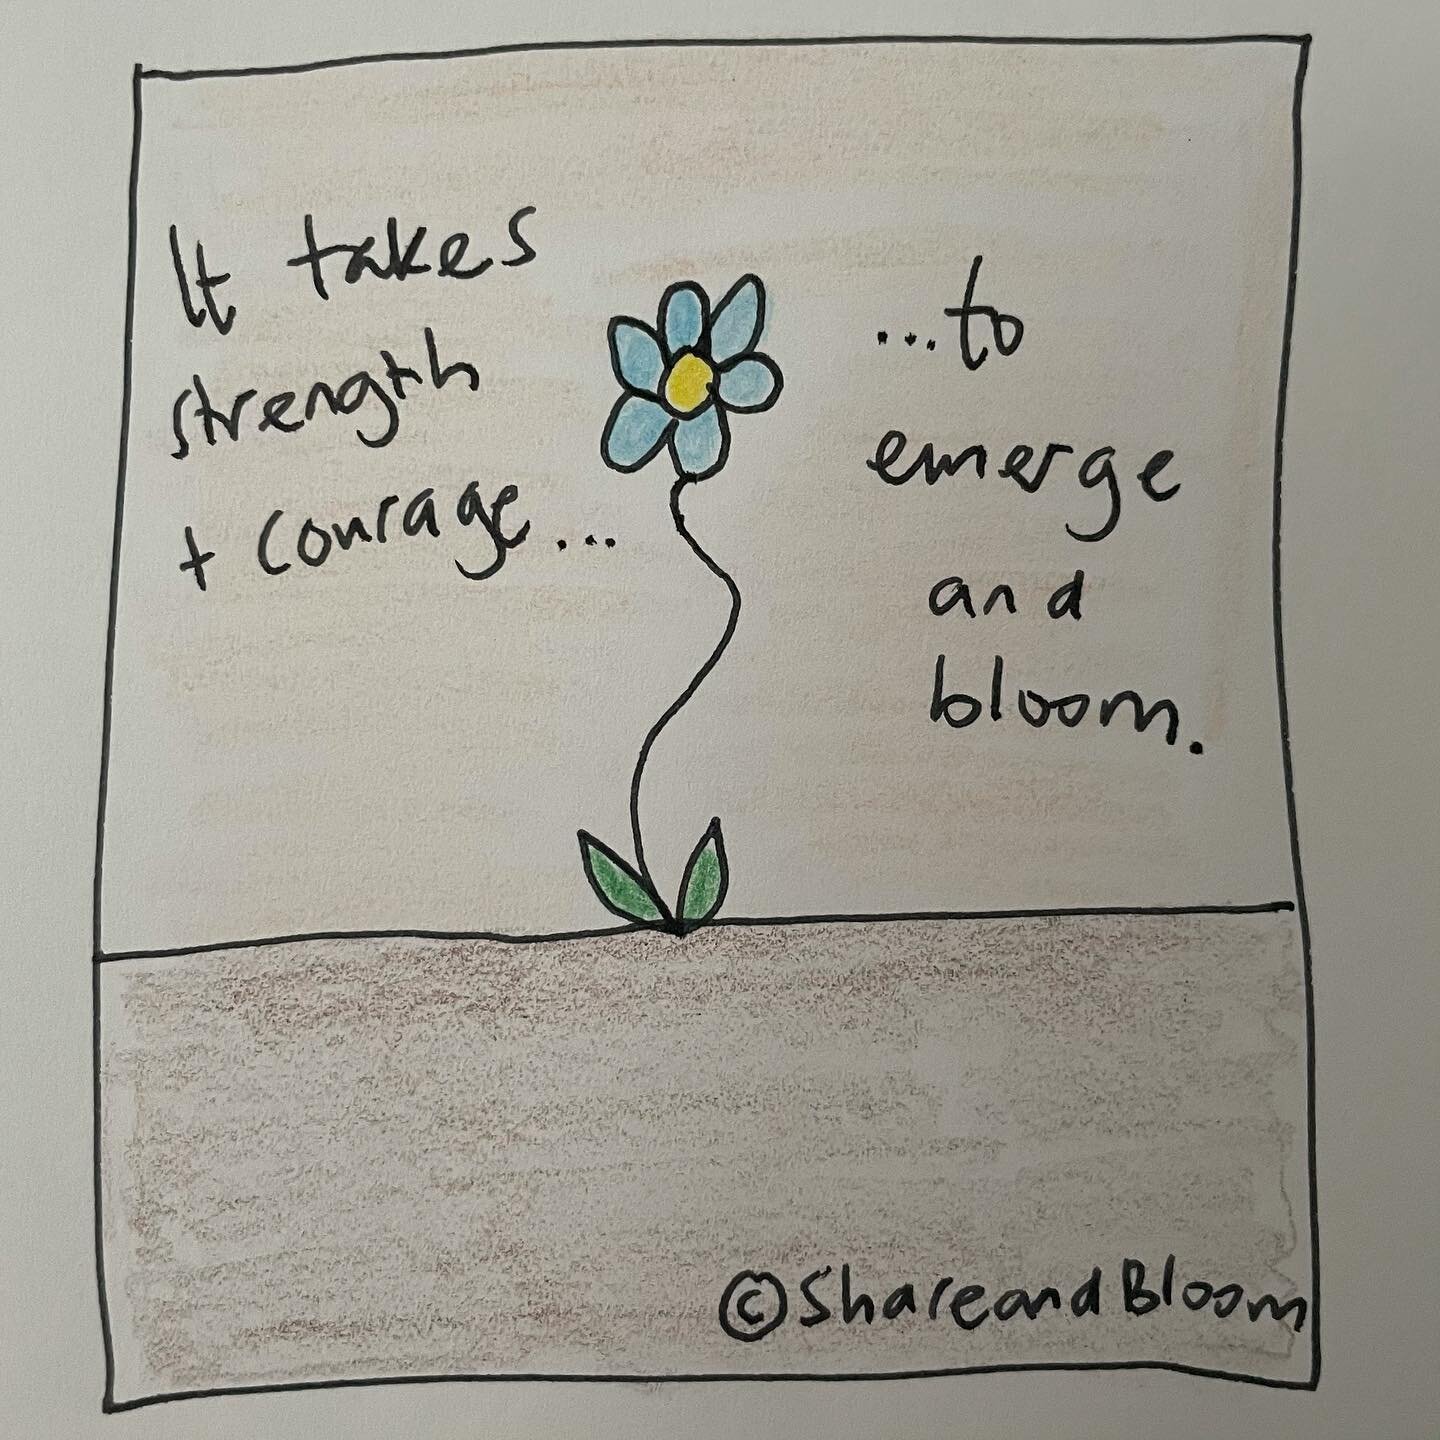 Transformational times.
Go gently.
⭐️
 
Day 24 The 100 Day Project 
https://the100dayproject.org/
https://www.shareandbloom.com/resources